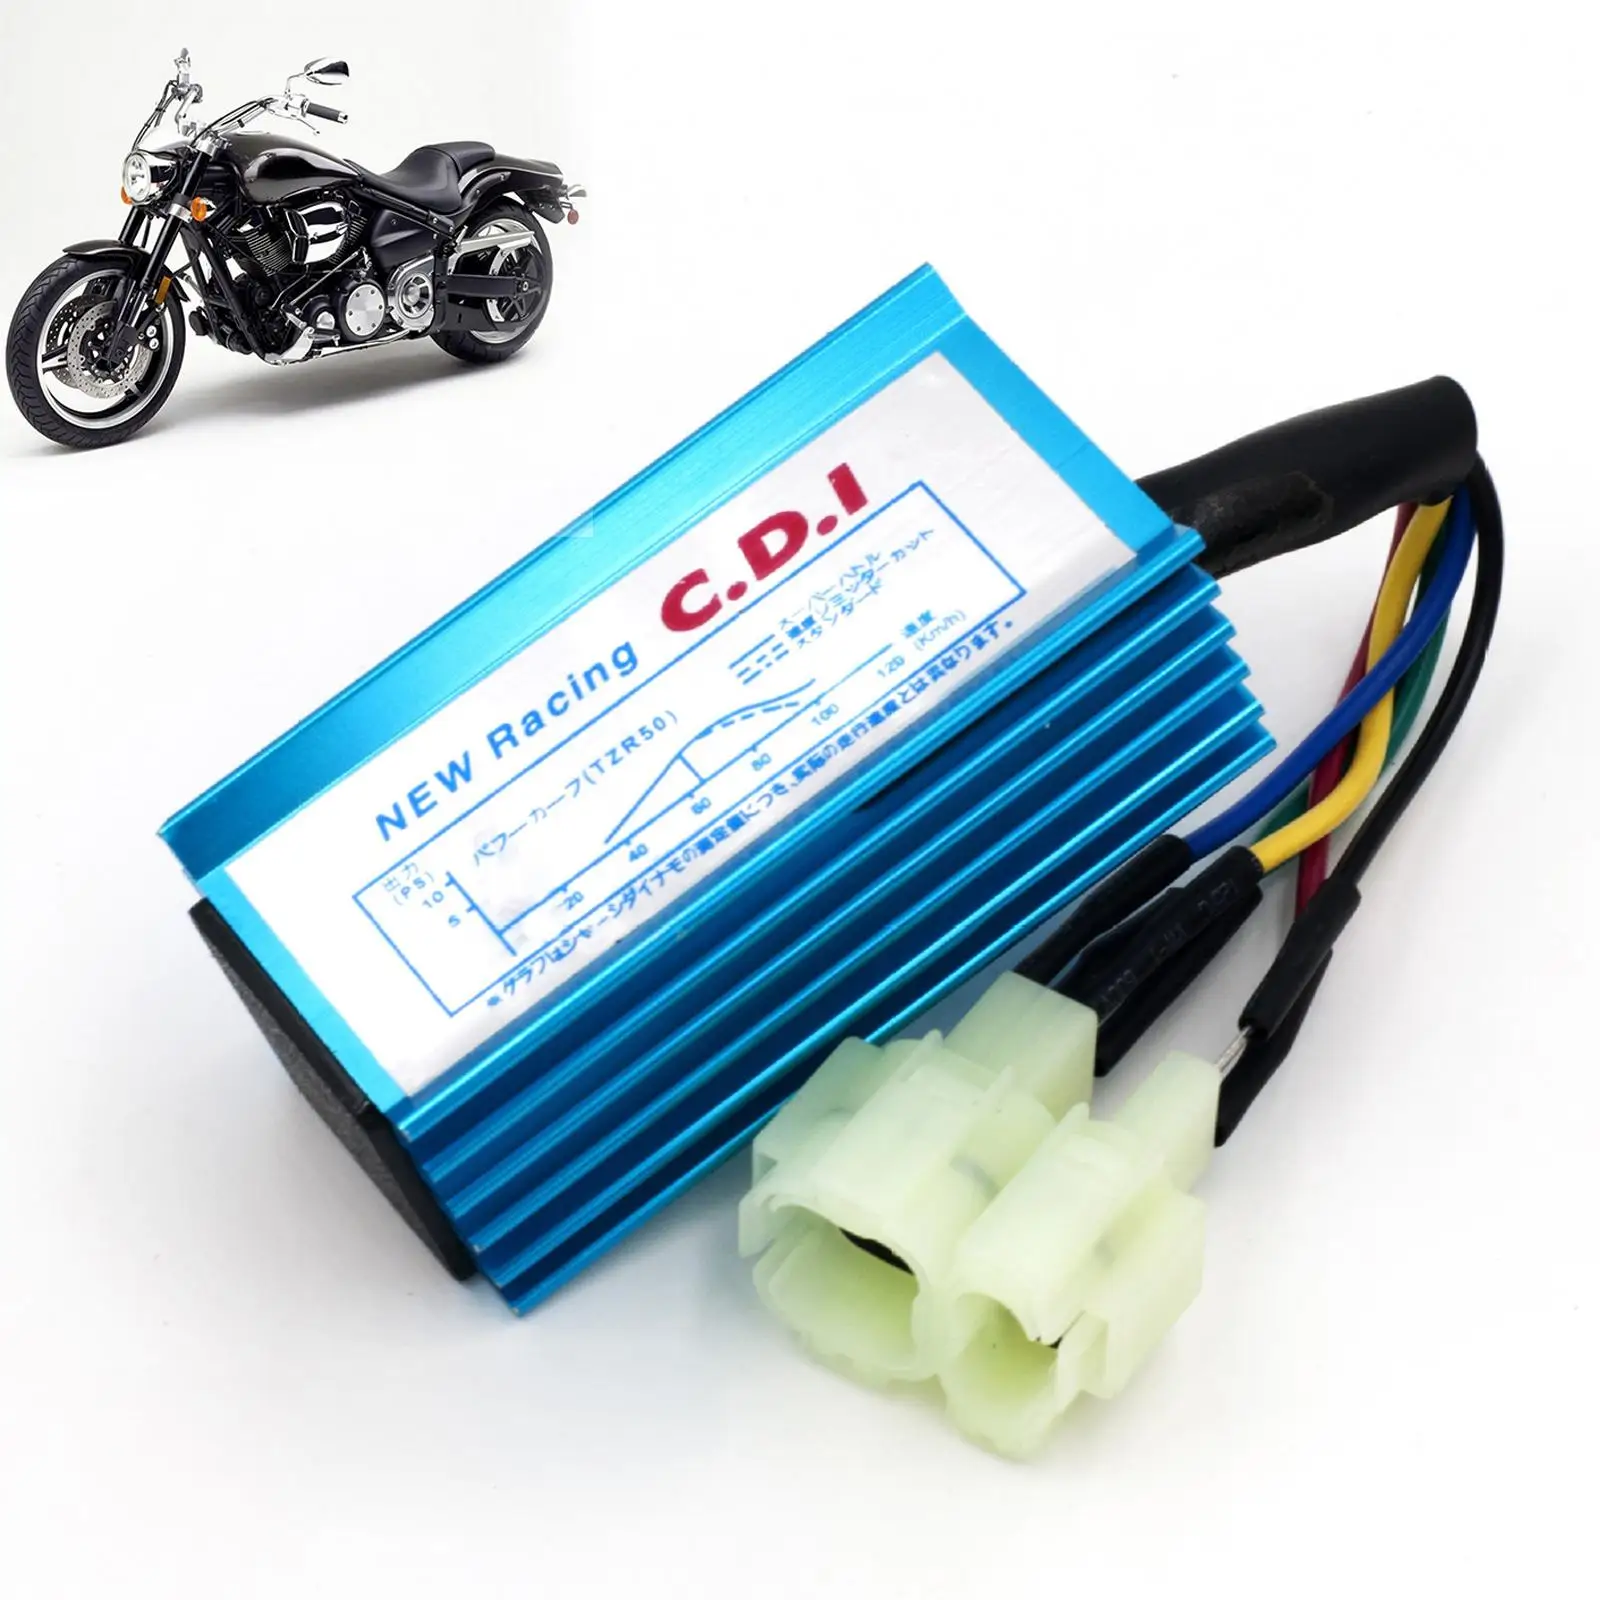 6 6  Cdi Box  Performance Aluminum Alloy Fits for Gy6 50cc-250cc Series Engines Motorcycle ATV Bike Mopeds